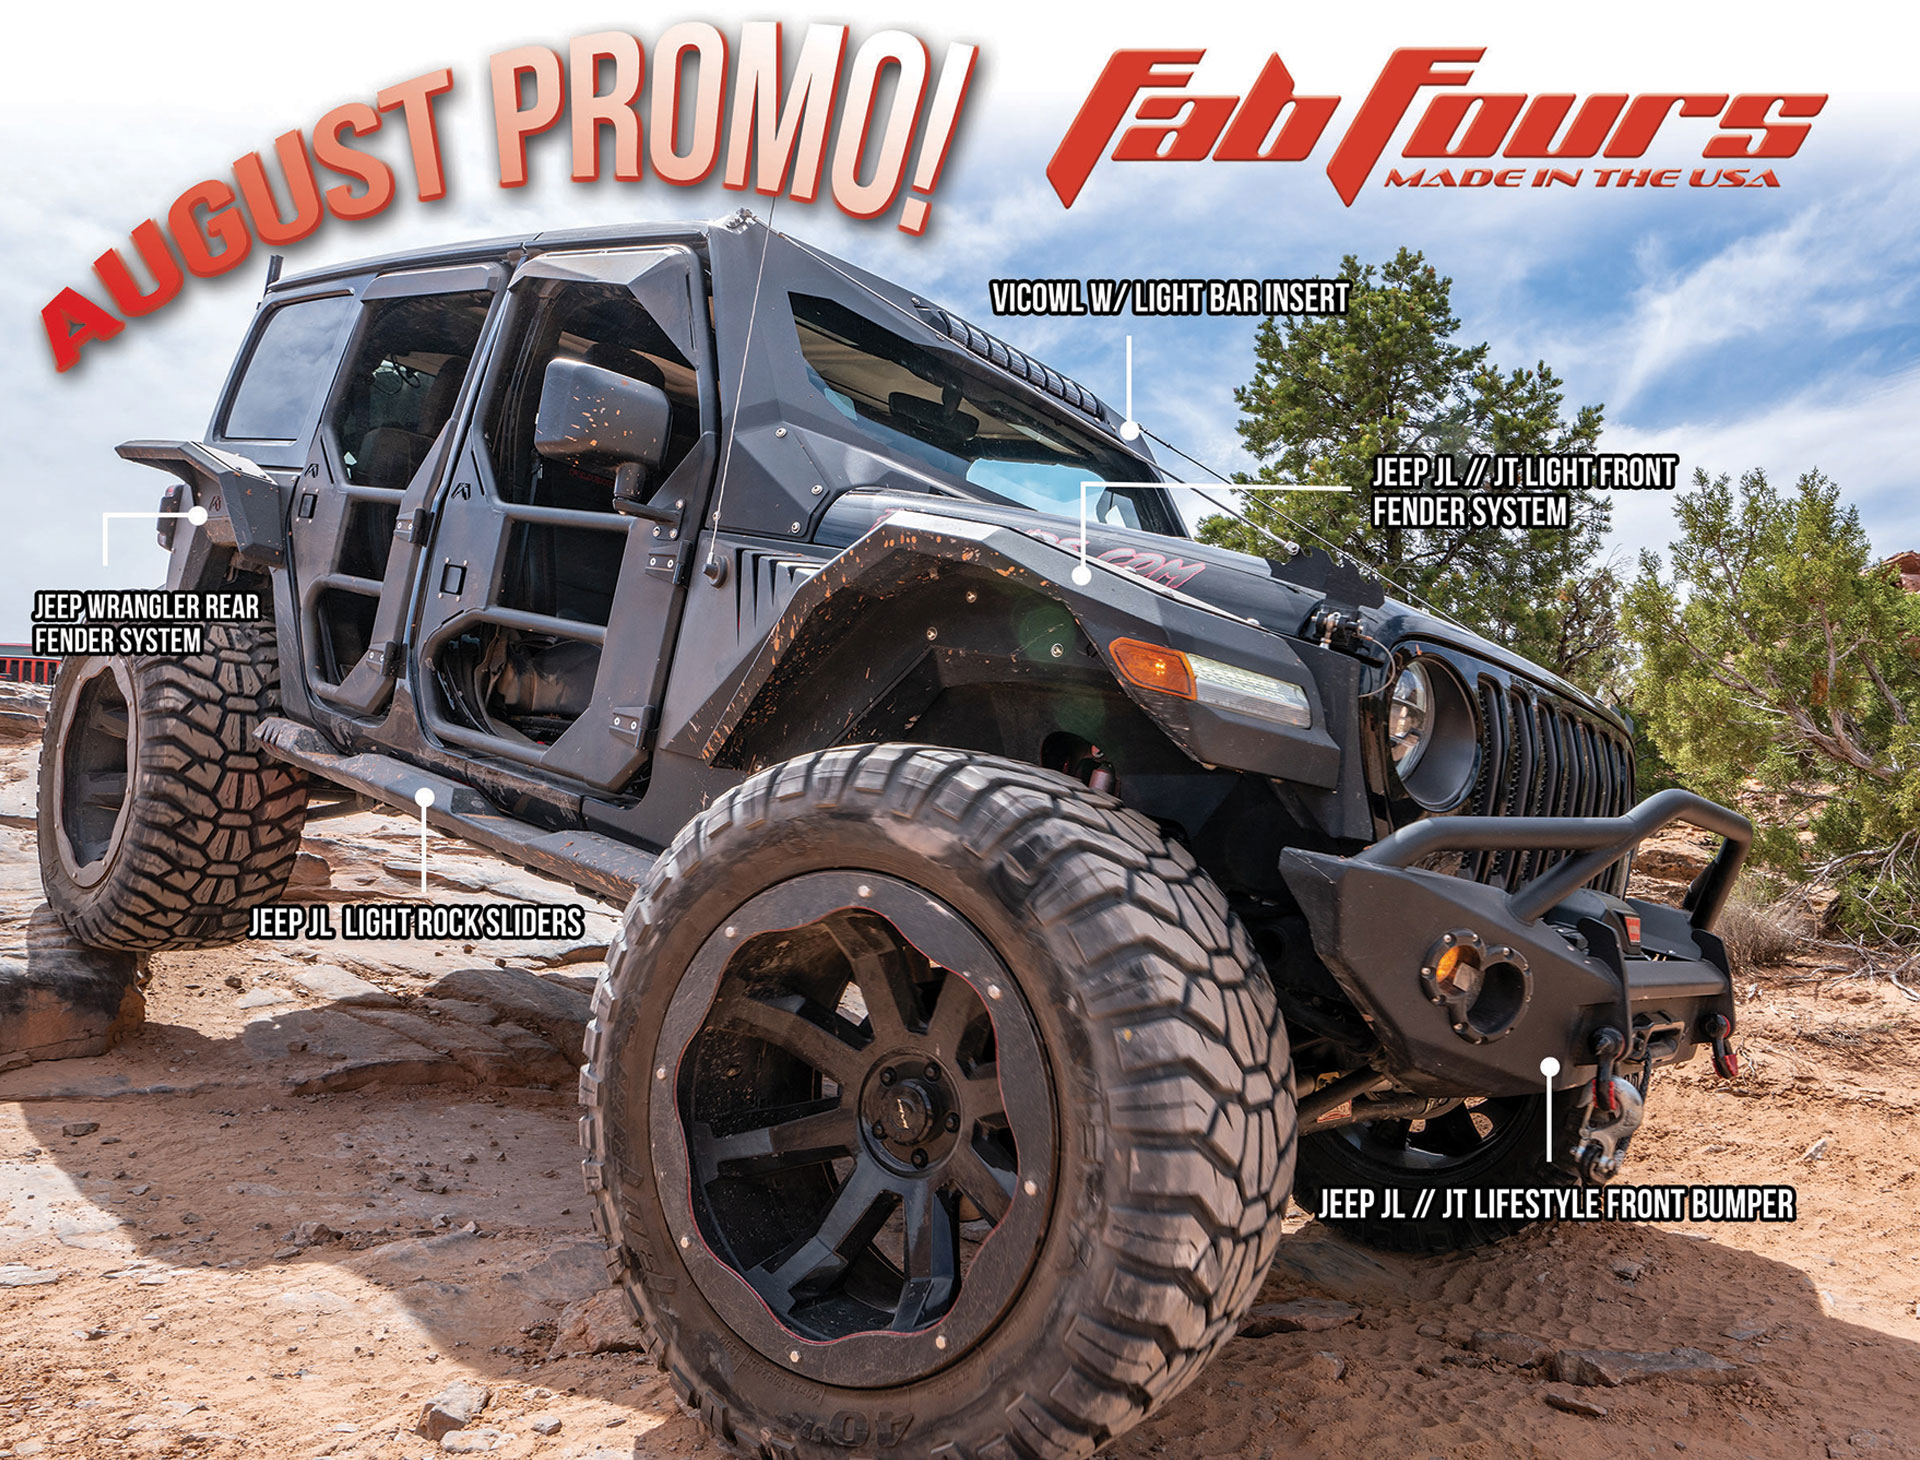 Fab Fours Is Offering Rebate On Jeep Bumpers And More